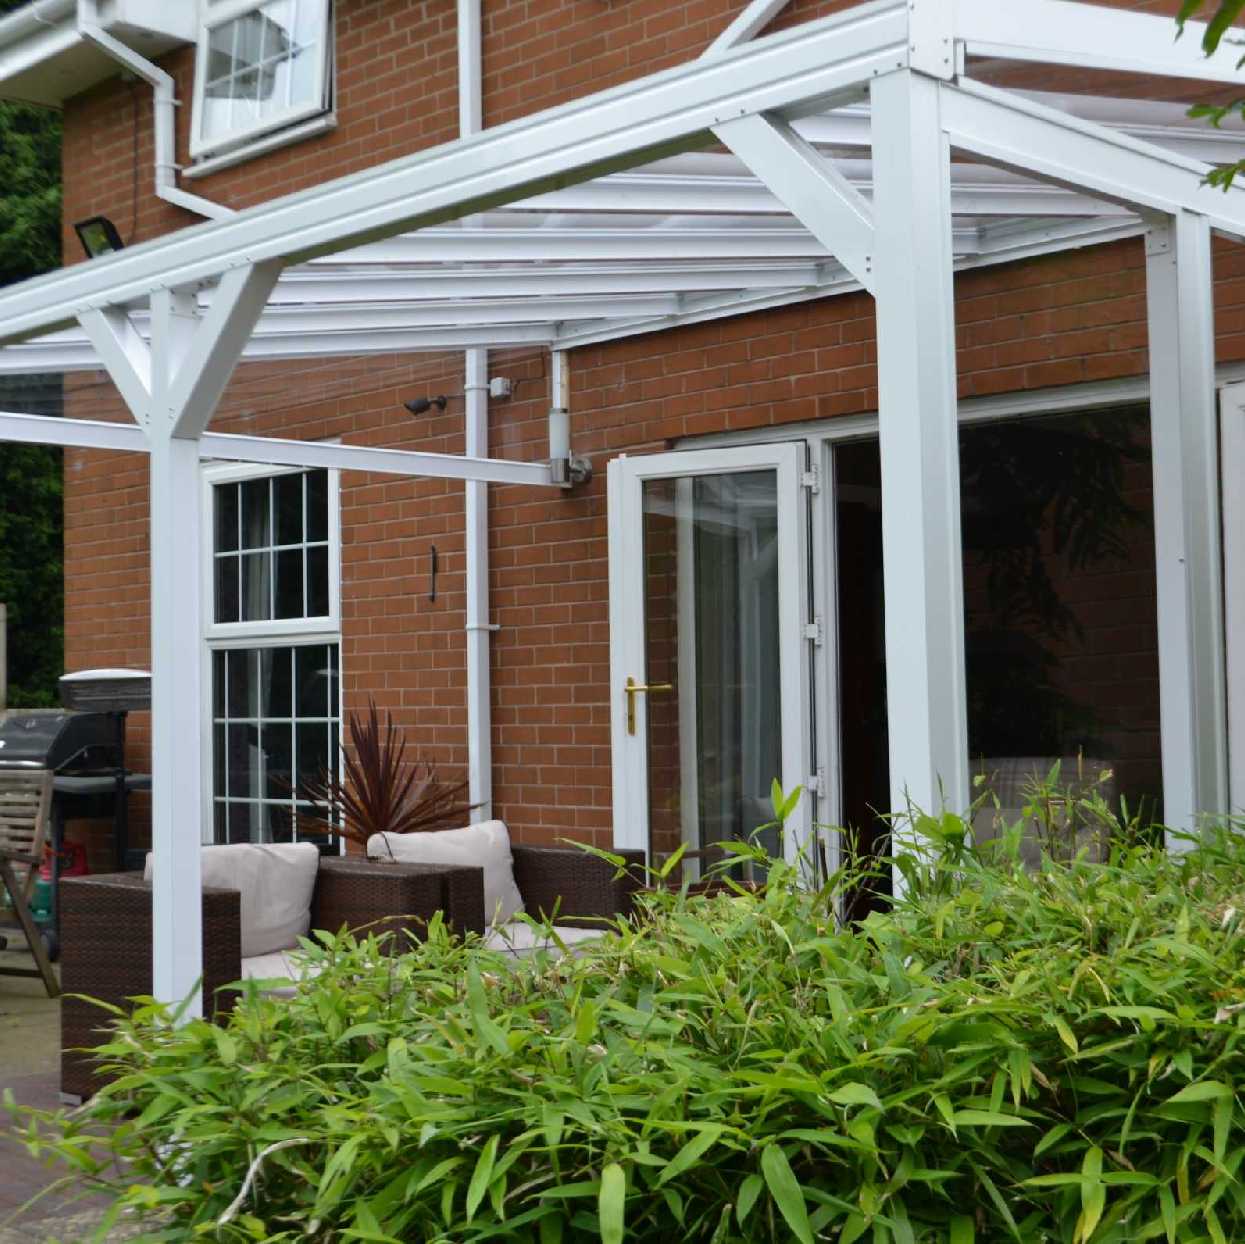 Omega Smart Lean-To Canopy, White UNGLAZED for 6mm Glazing - 4.2m (W) x 1.5m (P), (3) Supporting Posts from Omega Build